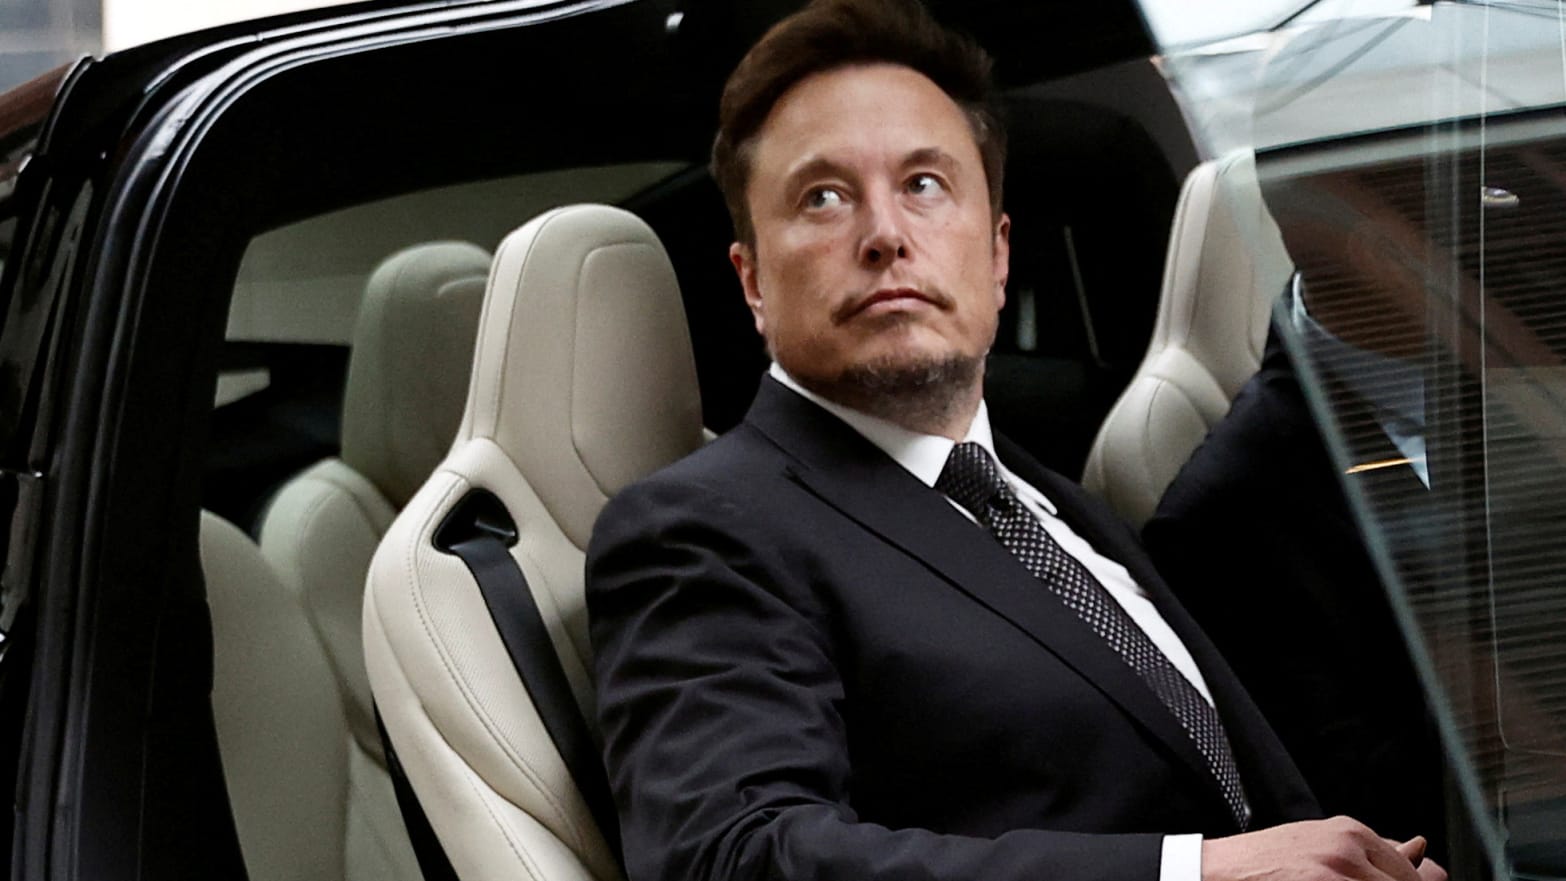 Elon Musk gets in a Tesla car as he leaves a hotel in Beijing, China May 31, 2023.